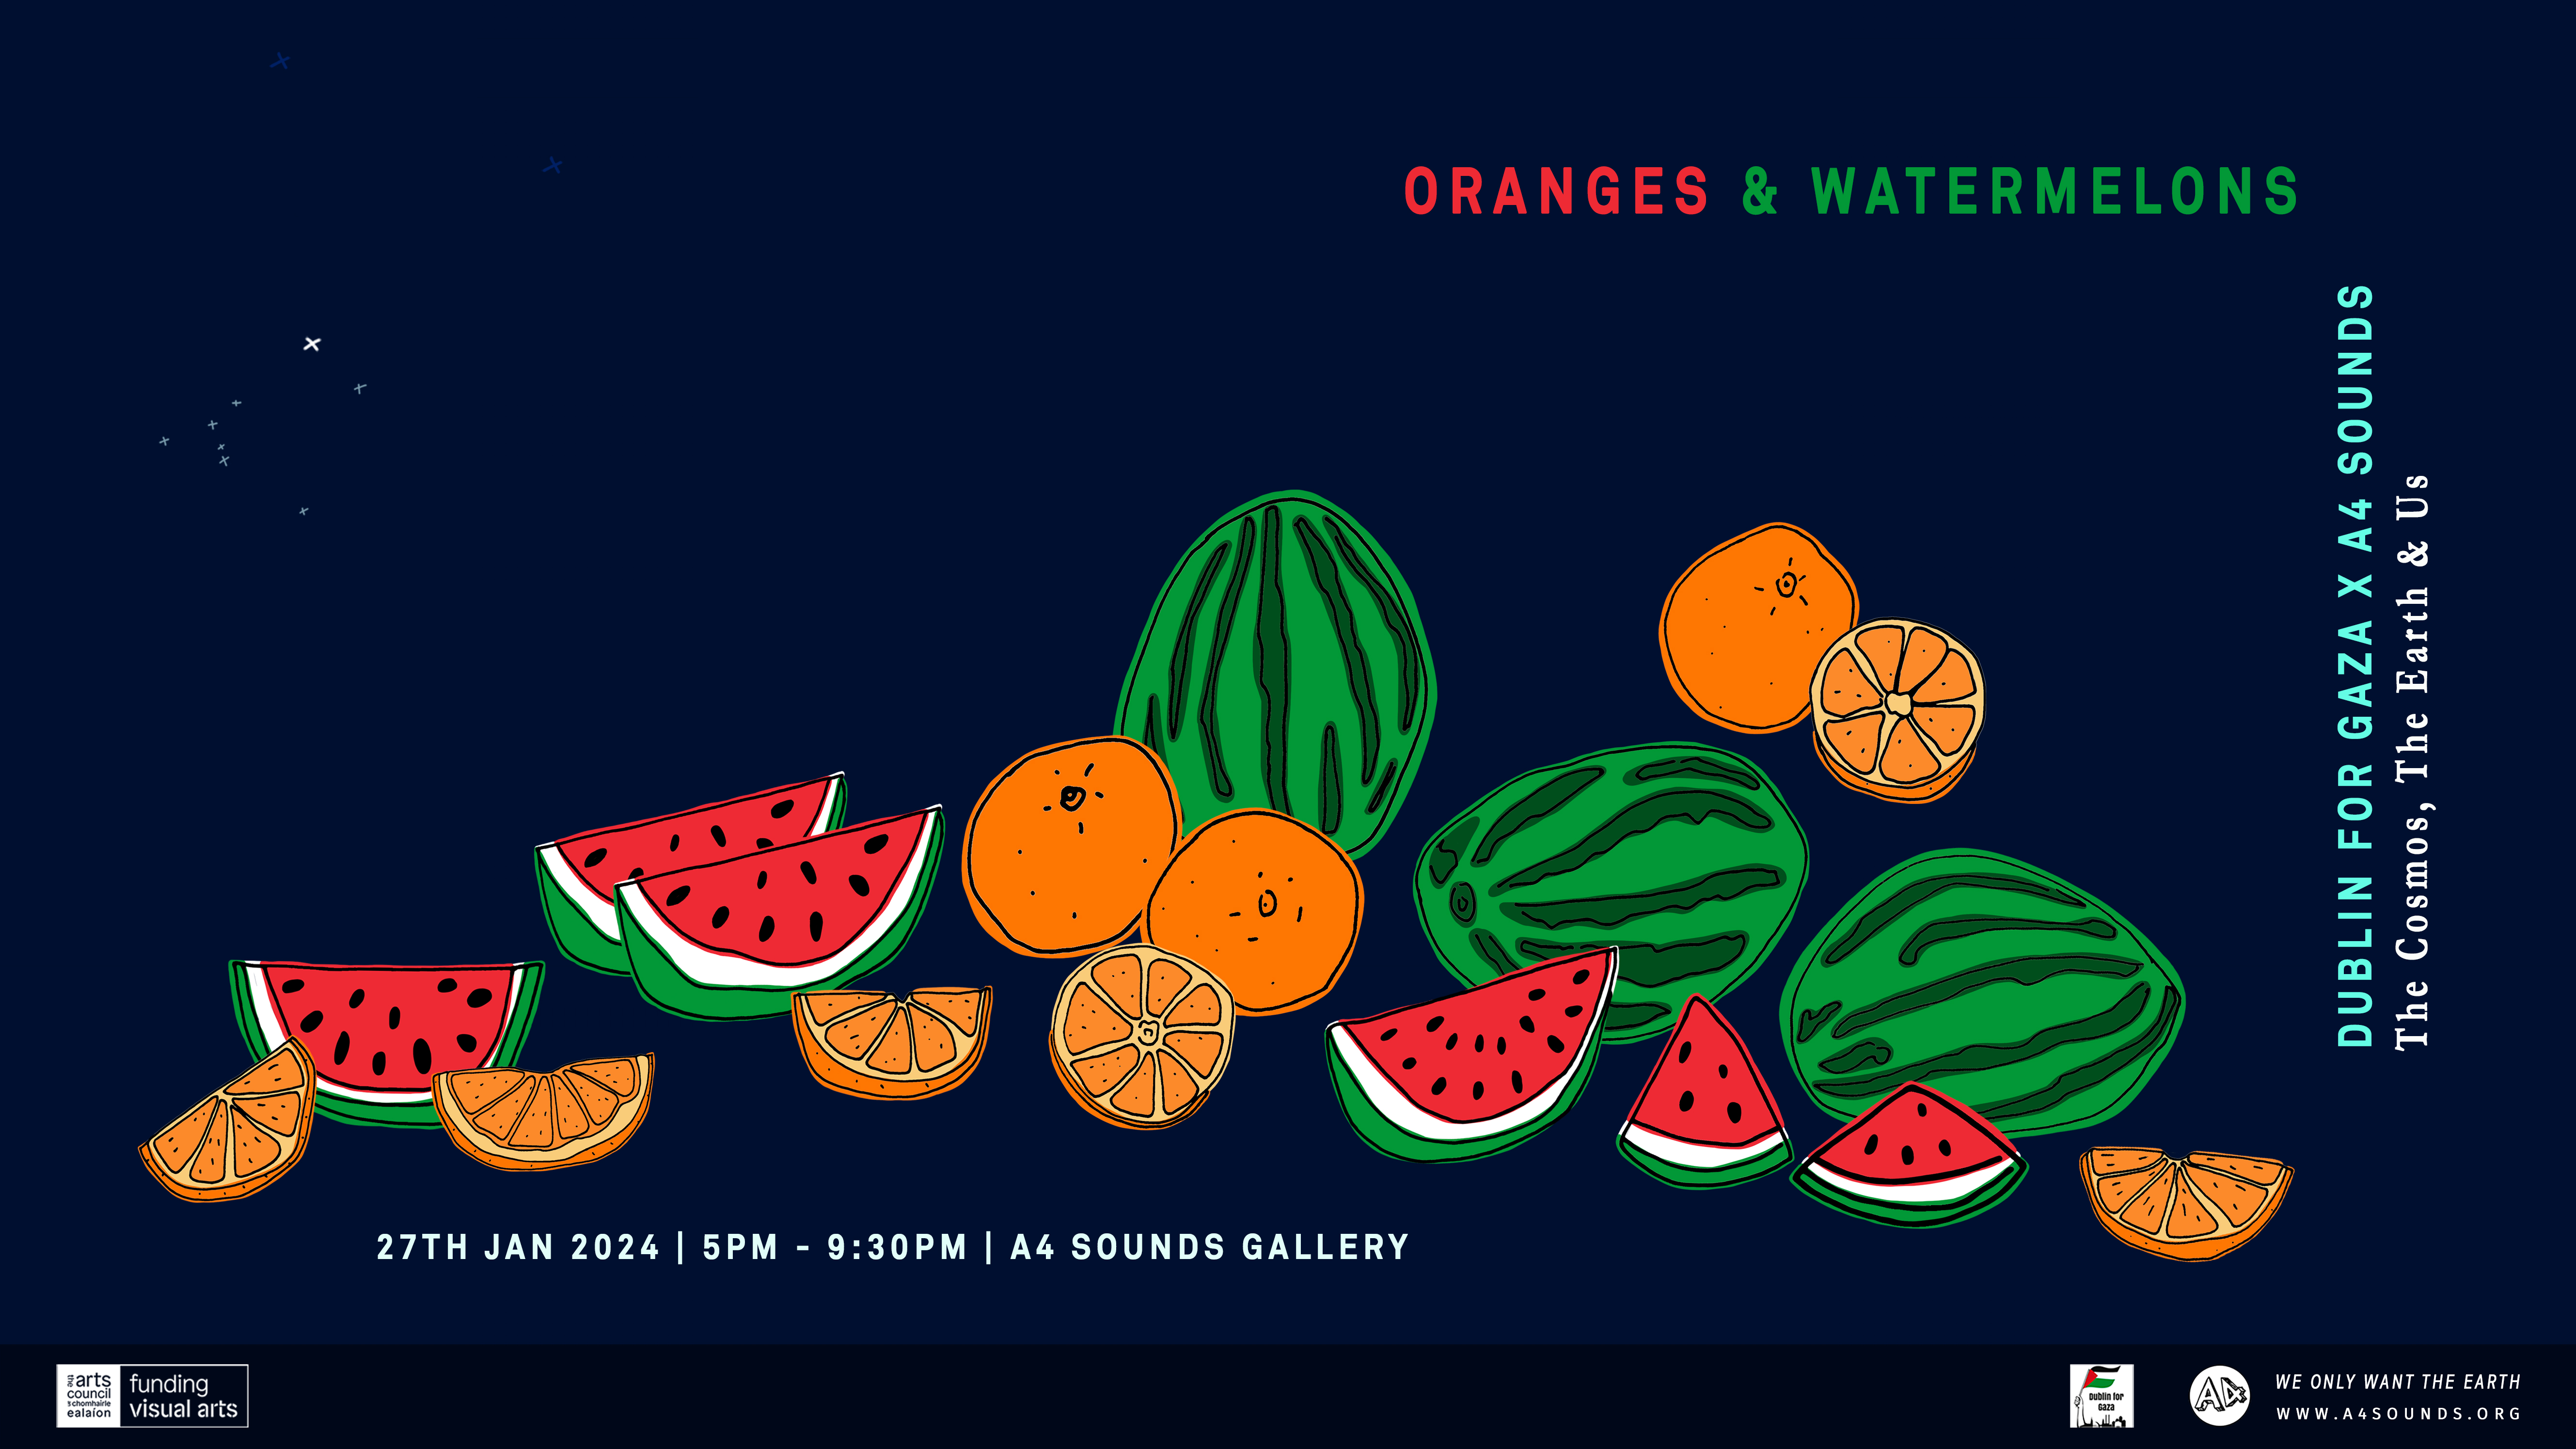 Poster for Oranges and Watermelons event. The image is landscape with a dark blue background like the night sky. The image is a graphic handdrawn still life of watermelons and oranges. There are some whole oranges, whole watermelons, slices of each, and also some half cut fruit. They are arranged like in a classical still life way. In the top left hand corner there is a drawing of a star constellation that included the star Sirius. The name of the event is in bold text on the top right hand side. Aligned vertically on the right is text that reads: Dublin For Gaza x A4 Sounds. The Cosmos, The Earth & Us. Along the bottom below the image of the fruit is text that reads: Sat 27th Jan. 5pm - 9:30pm. A4 Sounds Gallery.